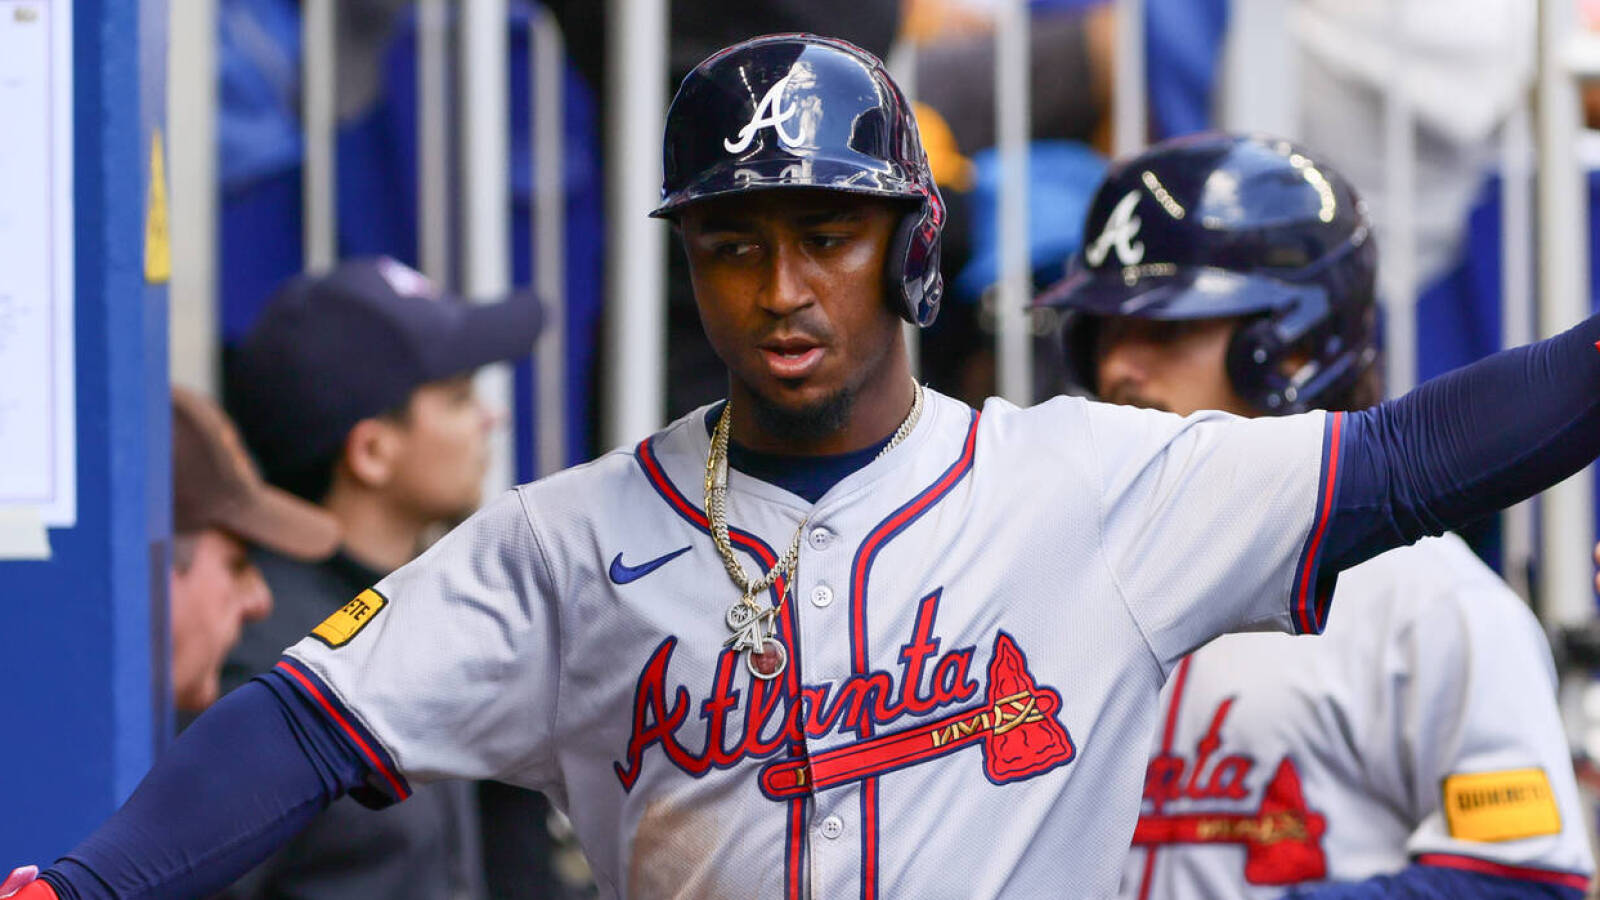 Braves 2B makes speedy recovery from fractured toe